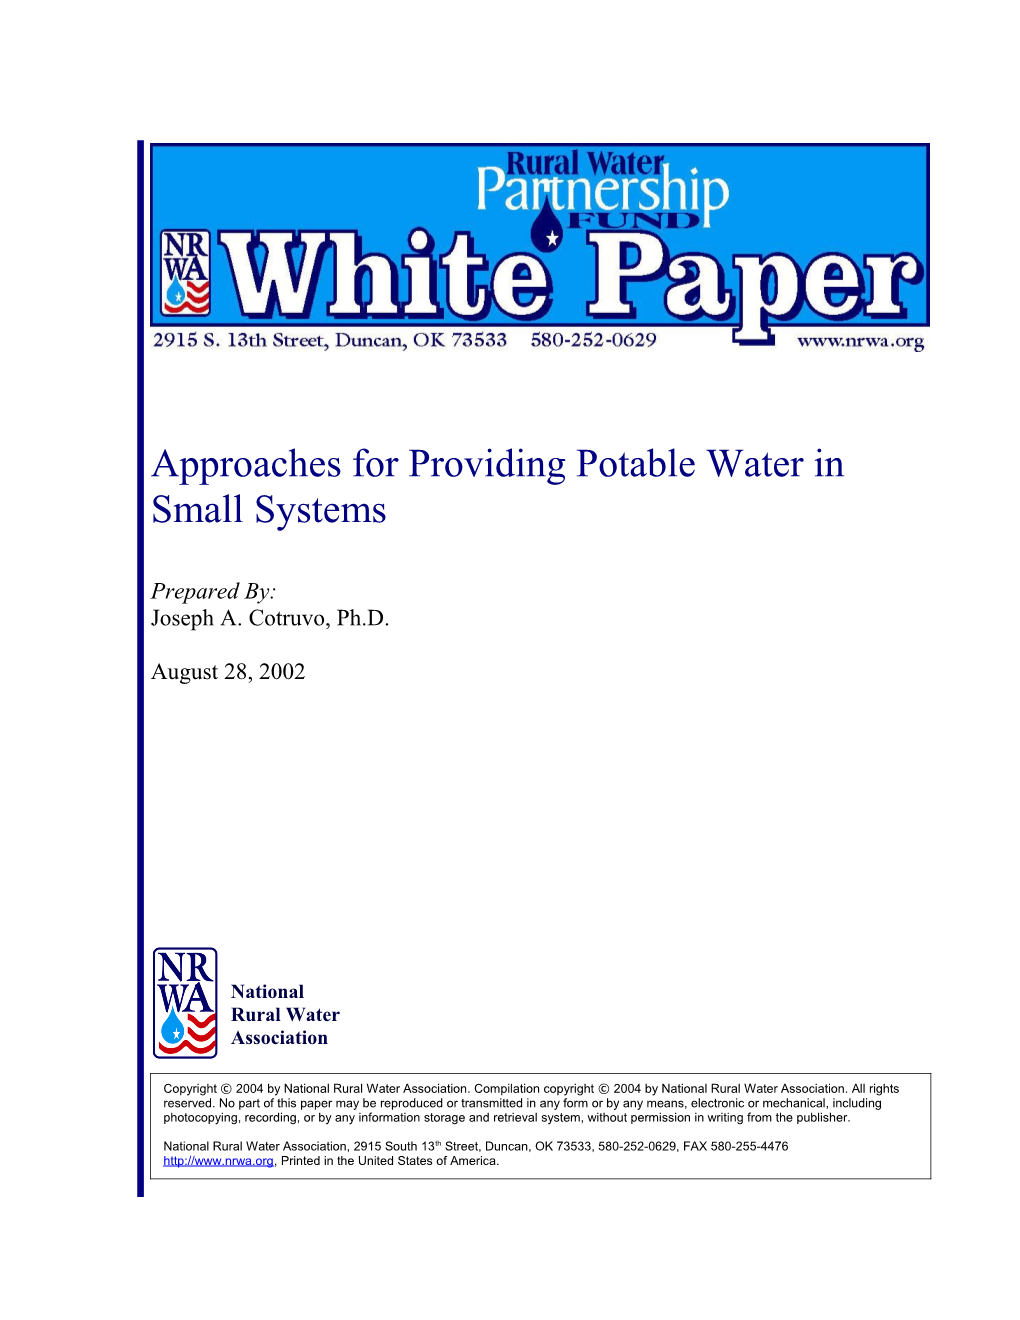 Choices for Optimizing Potable Water Sources in Small Systems